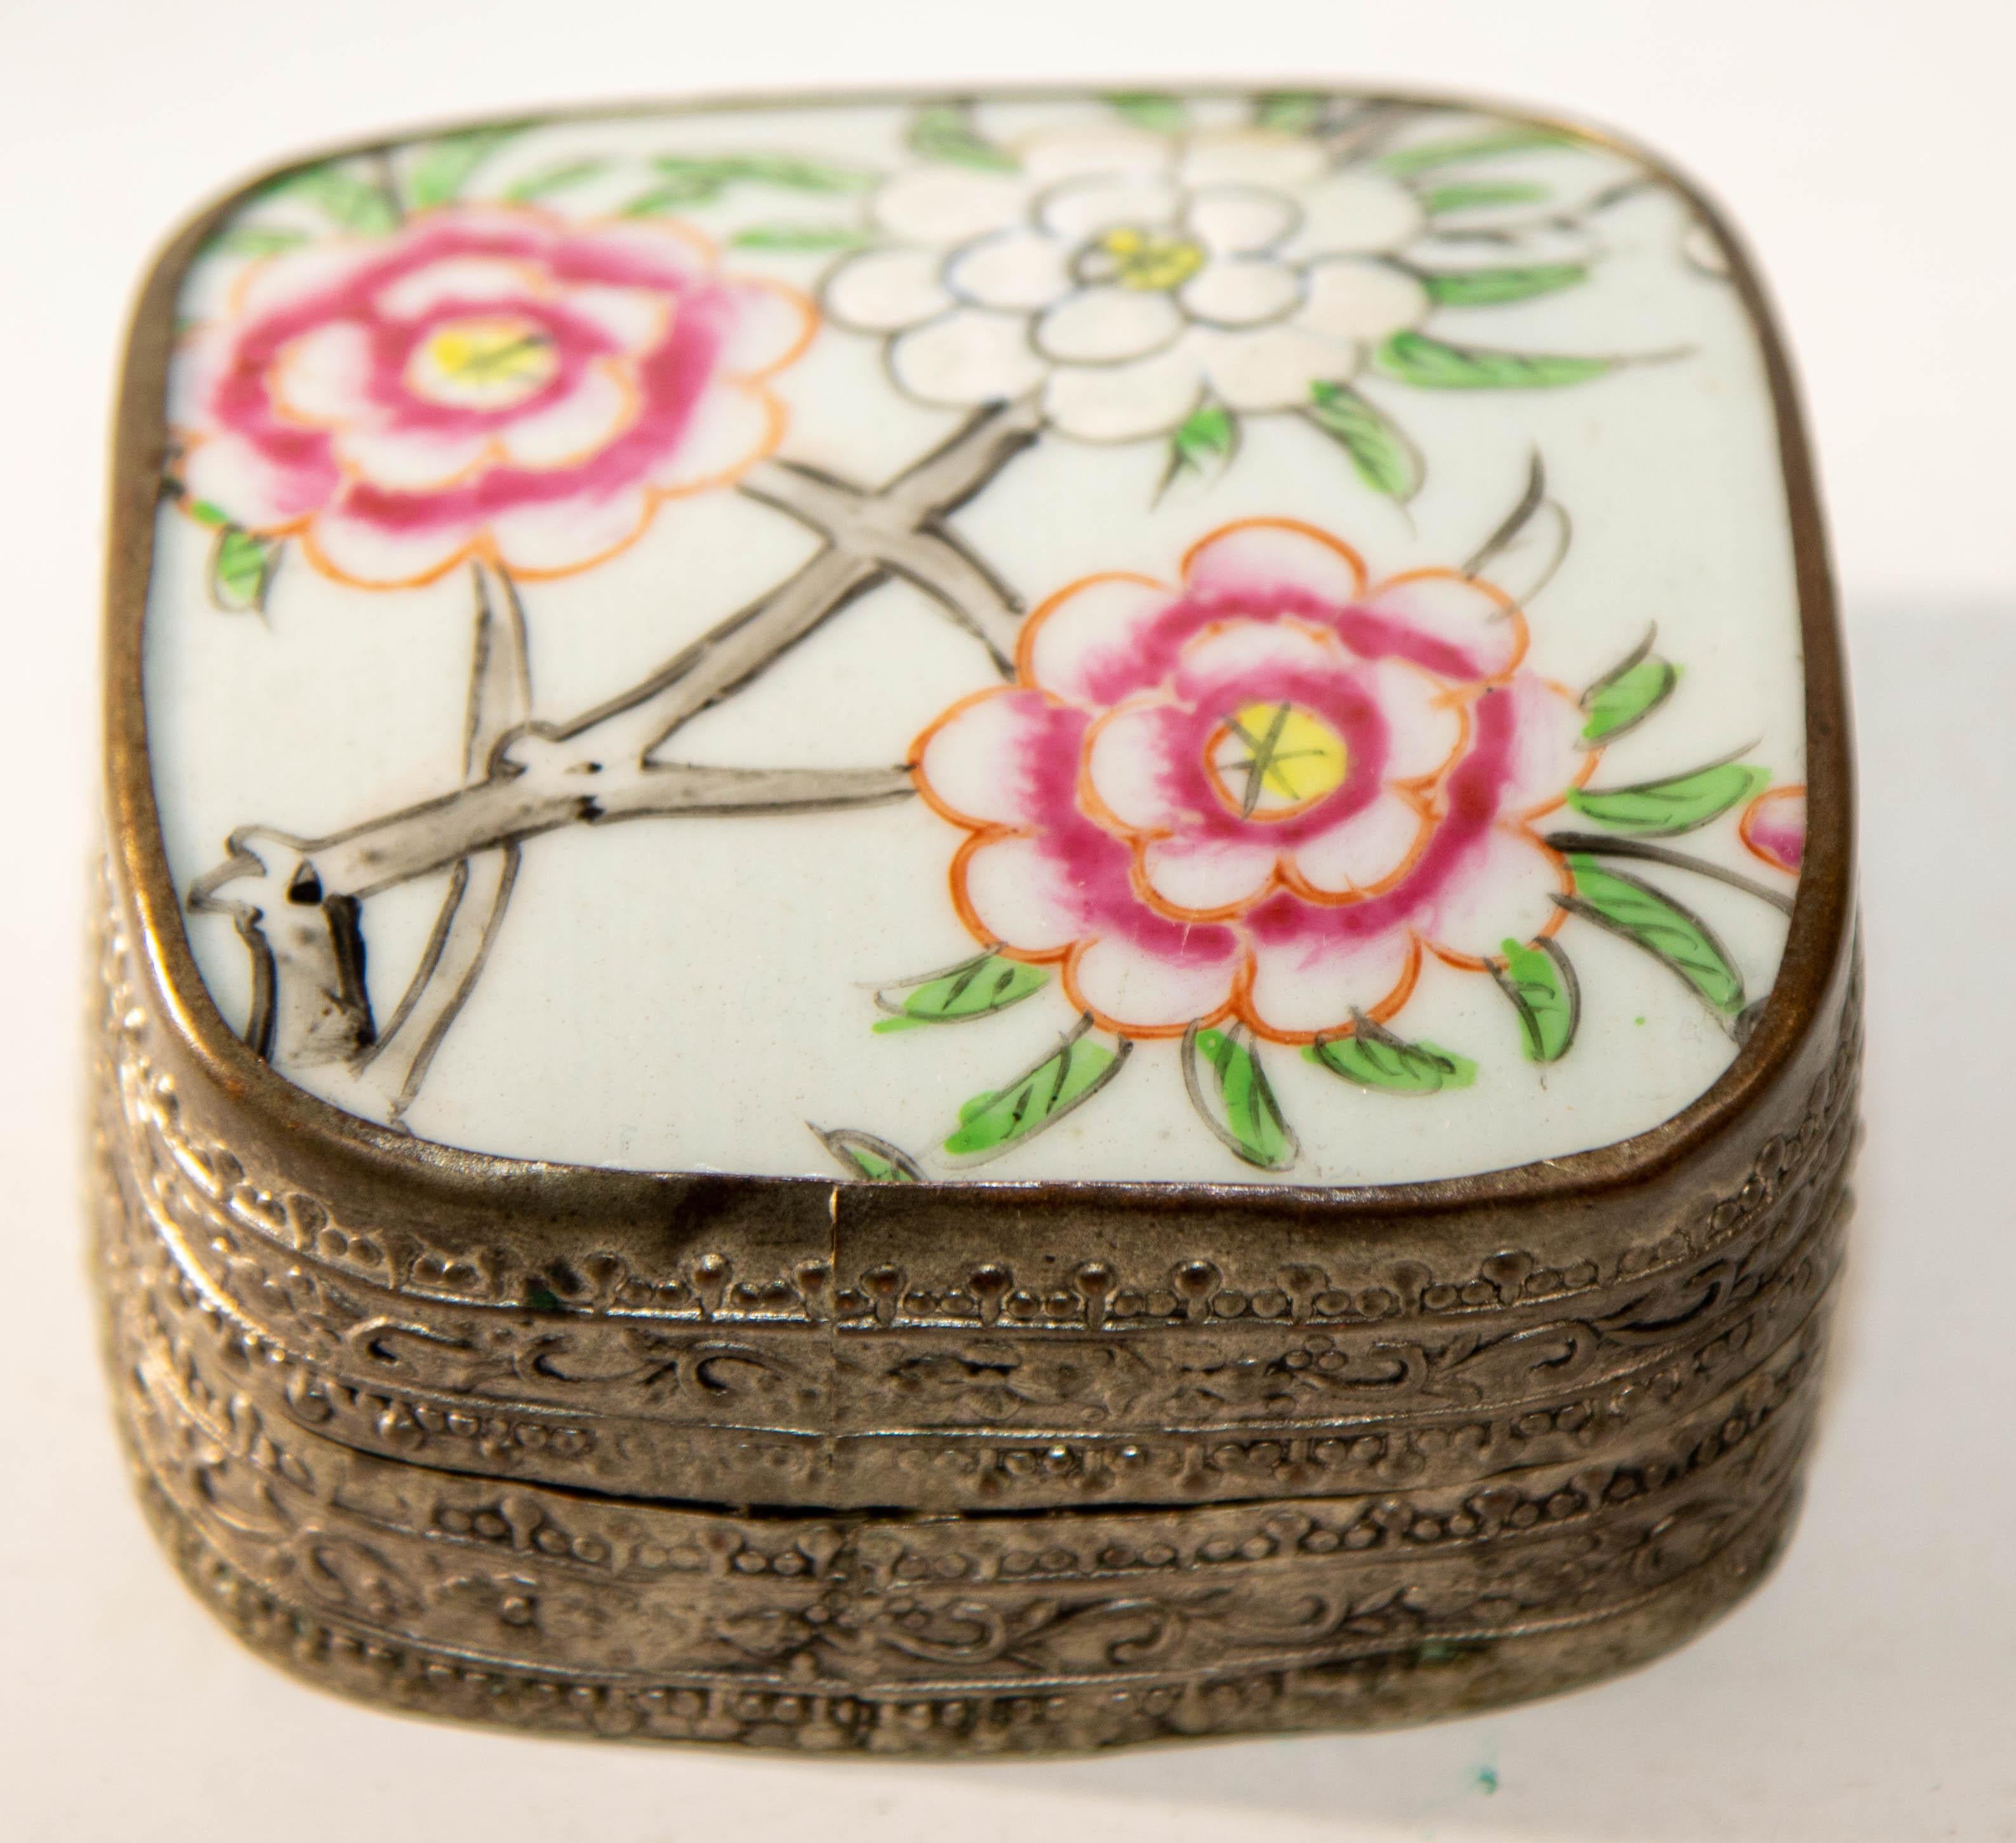 Chinese Porcelain Shard Box Oriental Decorative Nickel Silver Box.
Vintage Chinese Nickel Silver Box with Porcelain Shard Lid.
This Chinese Shard Porcelain trinket box is hand-crafted in a nickel copper alloy and created to fit a piece of porcelain